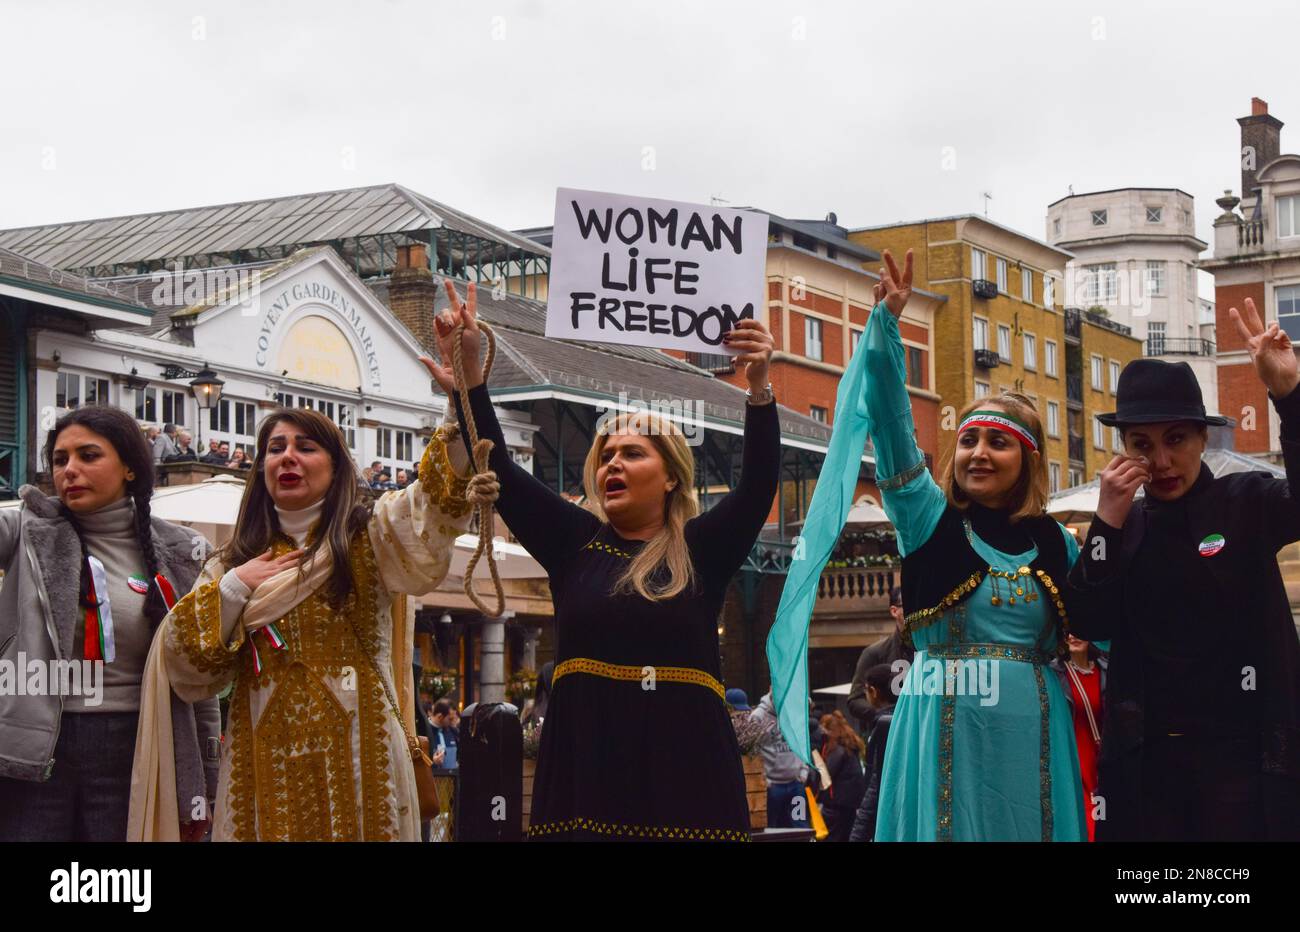 London, UK. 11th February 2023. A group of women staged a performance in Covent Garden in protest against the Iranian regime and the executions in Iran, and in support of freedom for Iran. Credit: Vuk Valcic/Alamy Live News Stock Photo